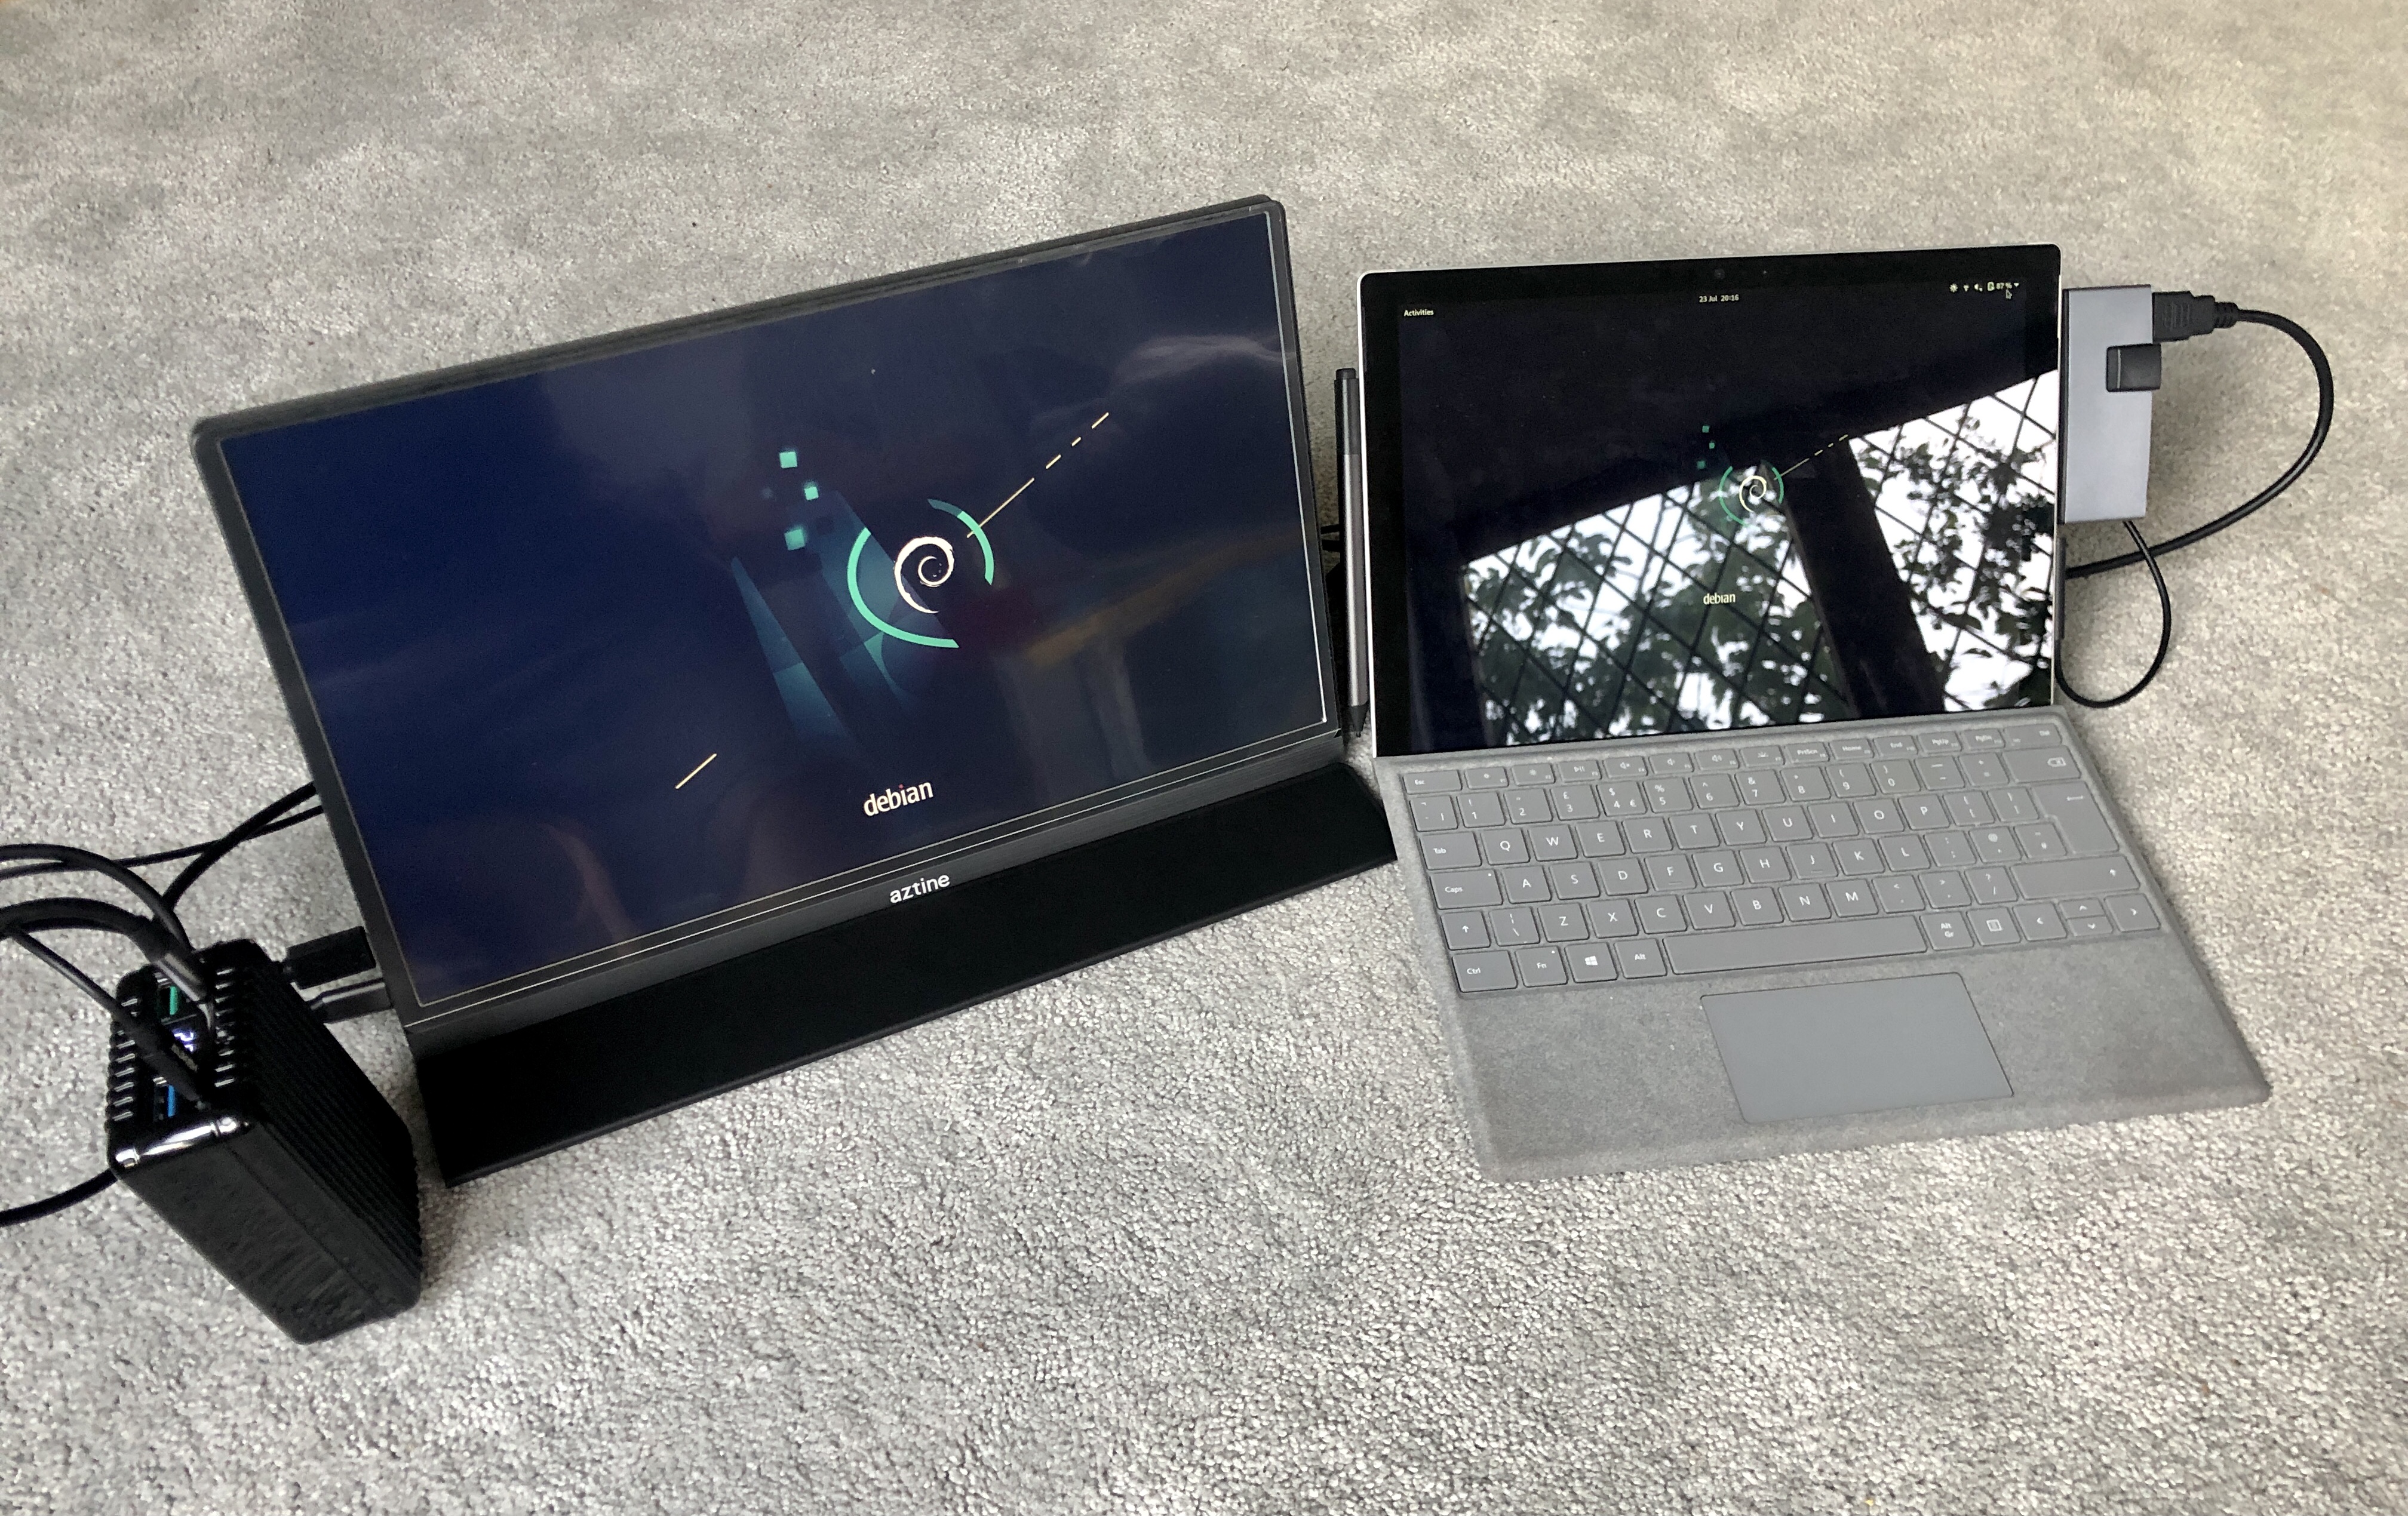 Surface Pro 6 connected to external monitor